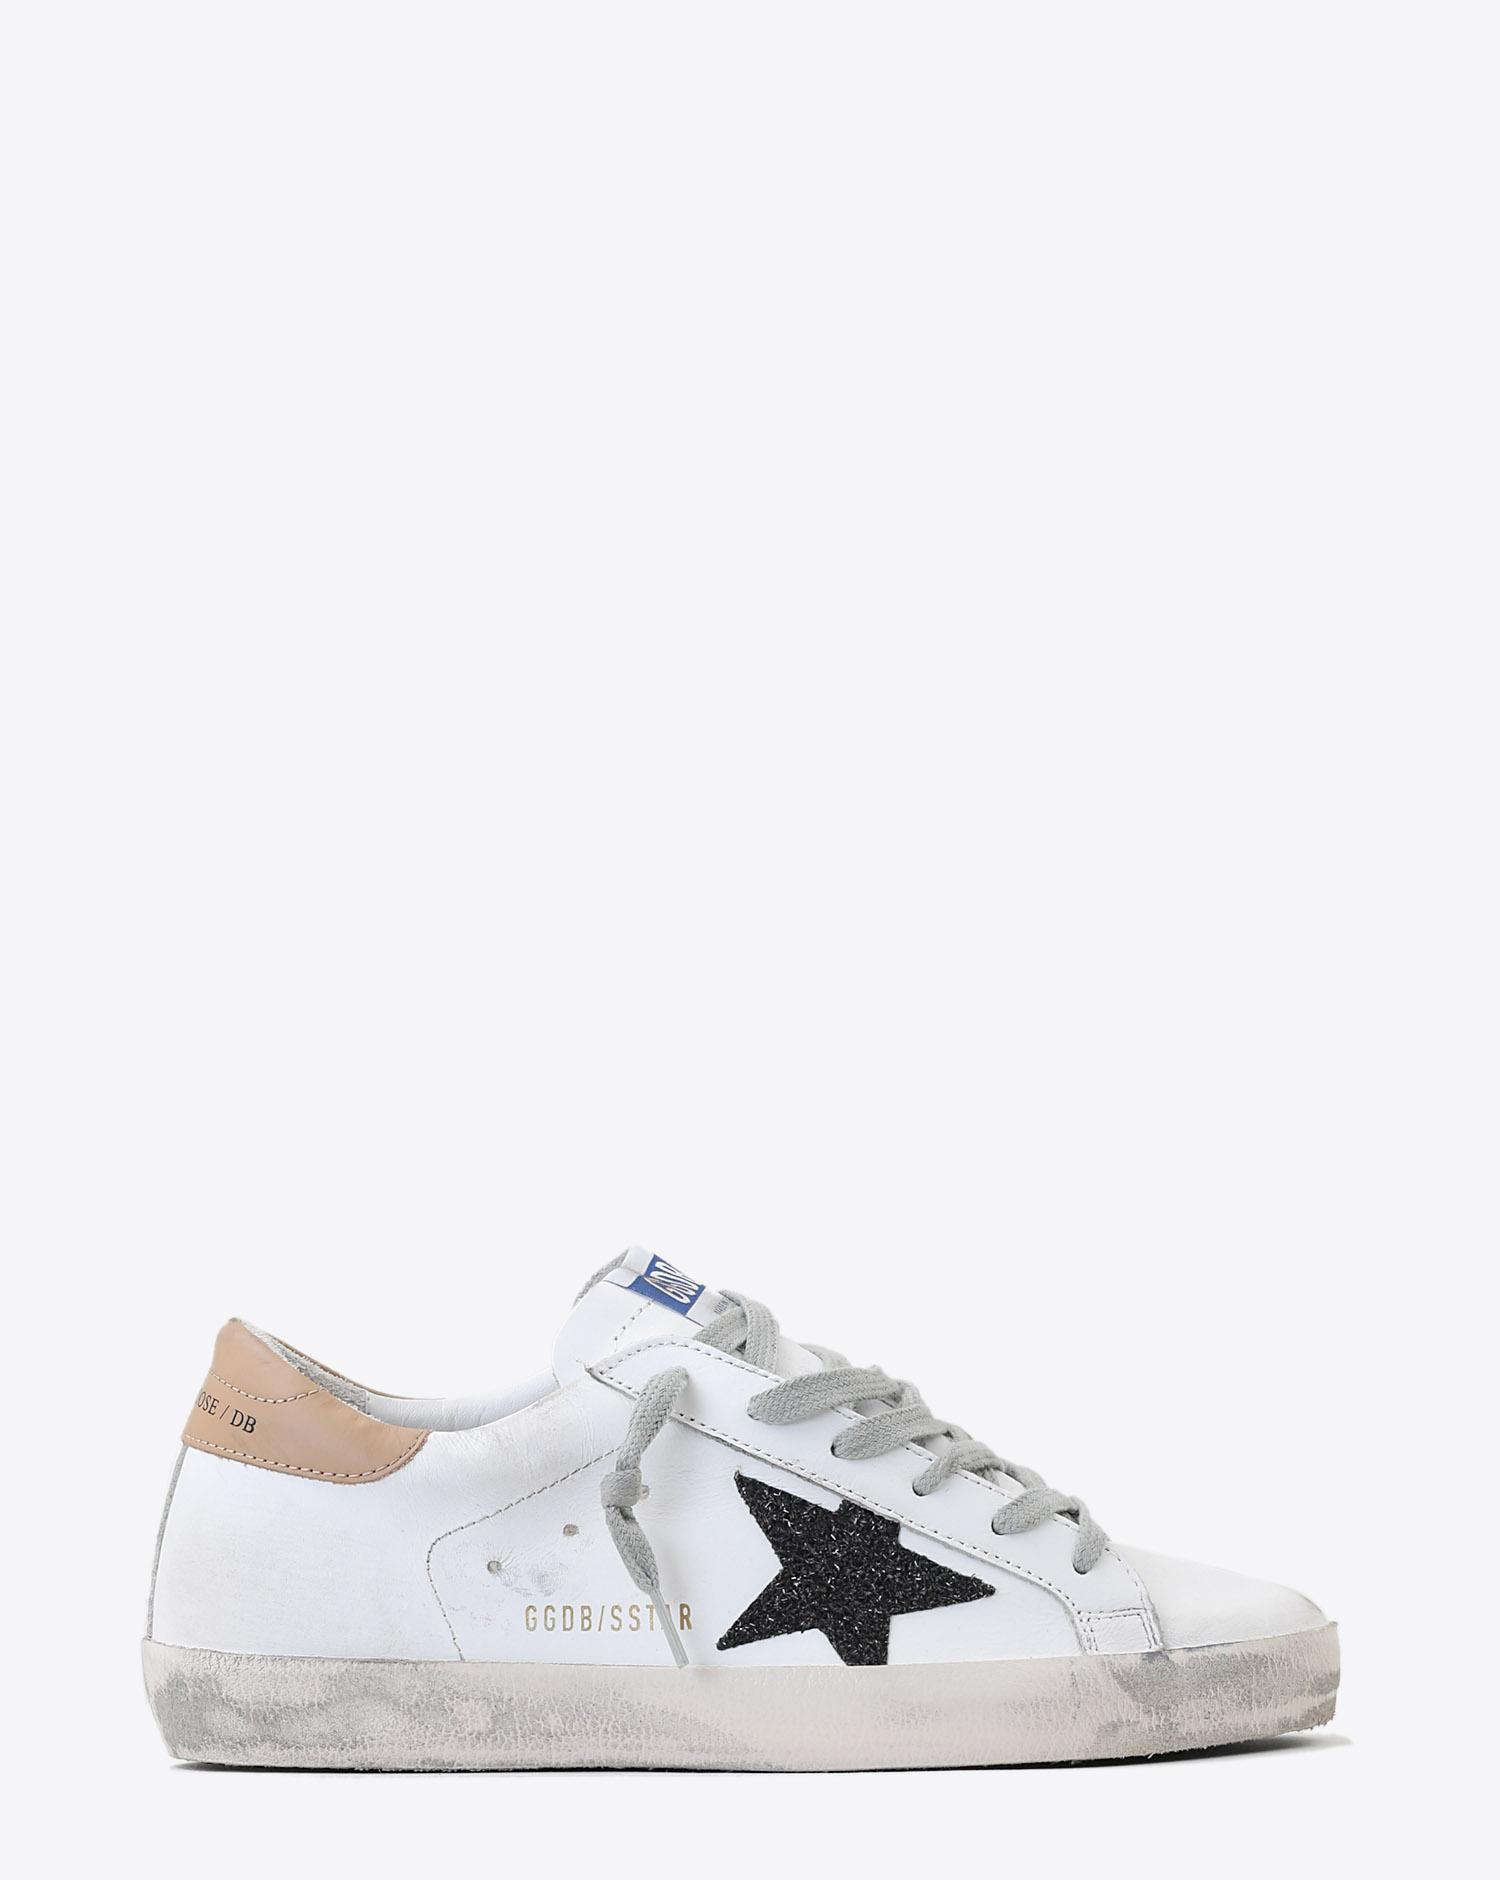 Golden Goose Woman Pré-Collection Sneakers Superstar - White Sand - Black Glitter  